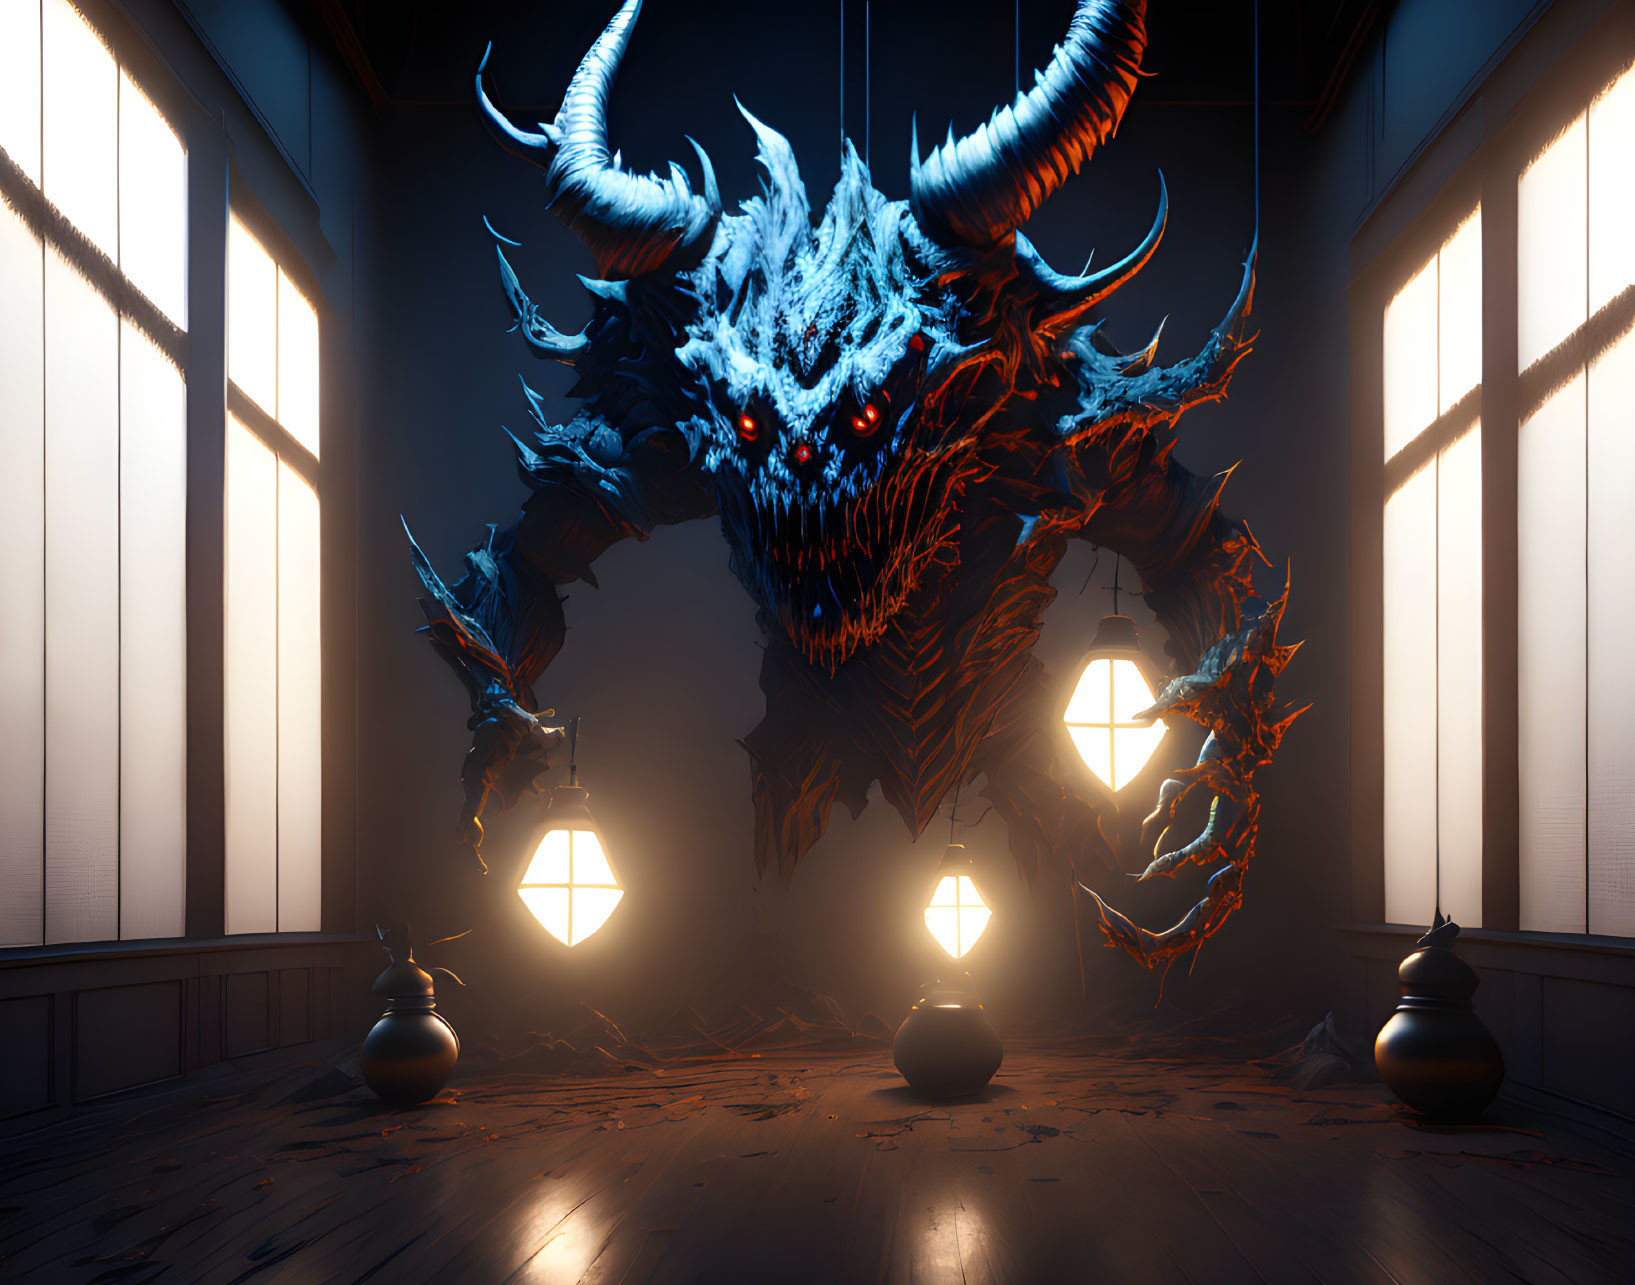 Sinister blue dragon with glowing red eyes in dim room